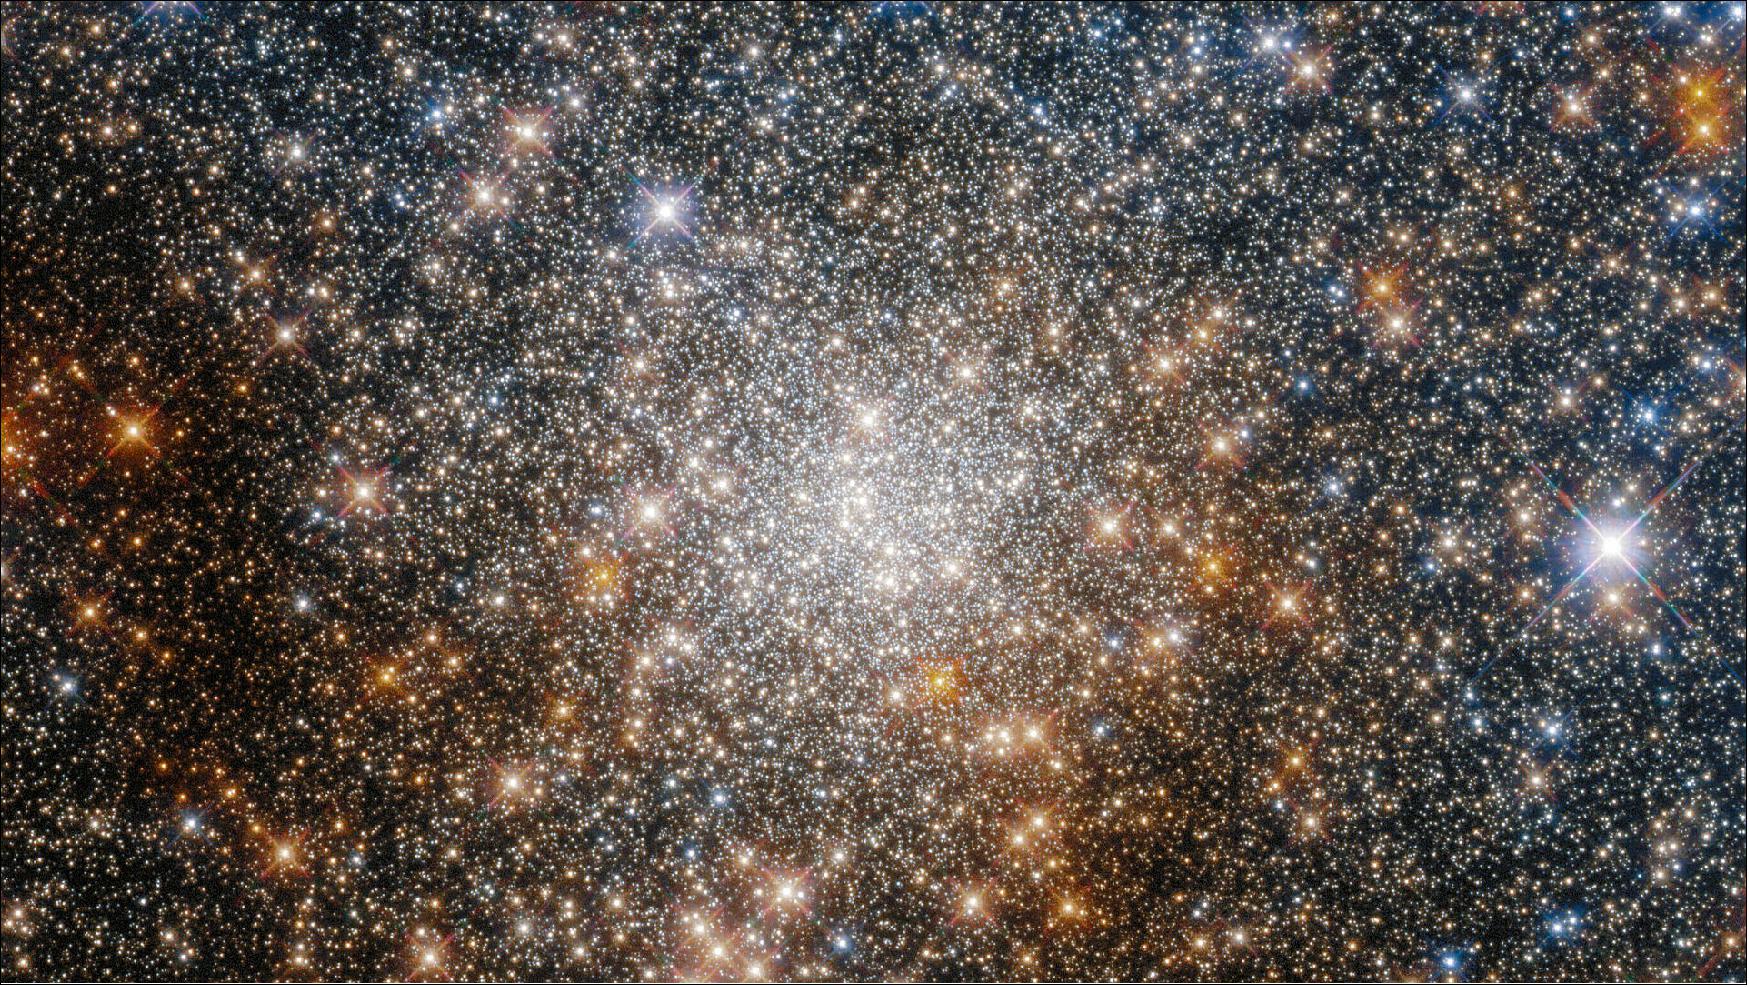 Figure 16: This starry snapshot is from a Hubble programme investigating globular clusters located towards the heart of the Milky Way. The central region of our home galaxy contains a tightly packed group of stars known as the Galactic bulge, which is also rich in interstellar dust. This dust has made globular clusters near the Galactic centre difficult to study, as it absorbs starlight and can even change the apparent colours of the stars in these clusters. Hubble's sensitivity at both visible and infrared wavelengths has allowed astronomers to measure how the colours of these globular clusters have been changed by interstellar dust, and thereby to establish their ages (image credit: ESA/Hubble & NASA, R. Cohen; CC BY 4.0)